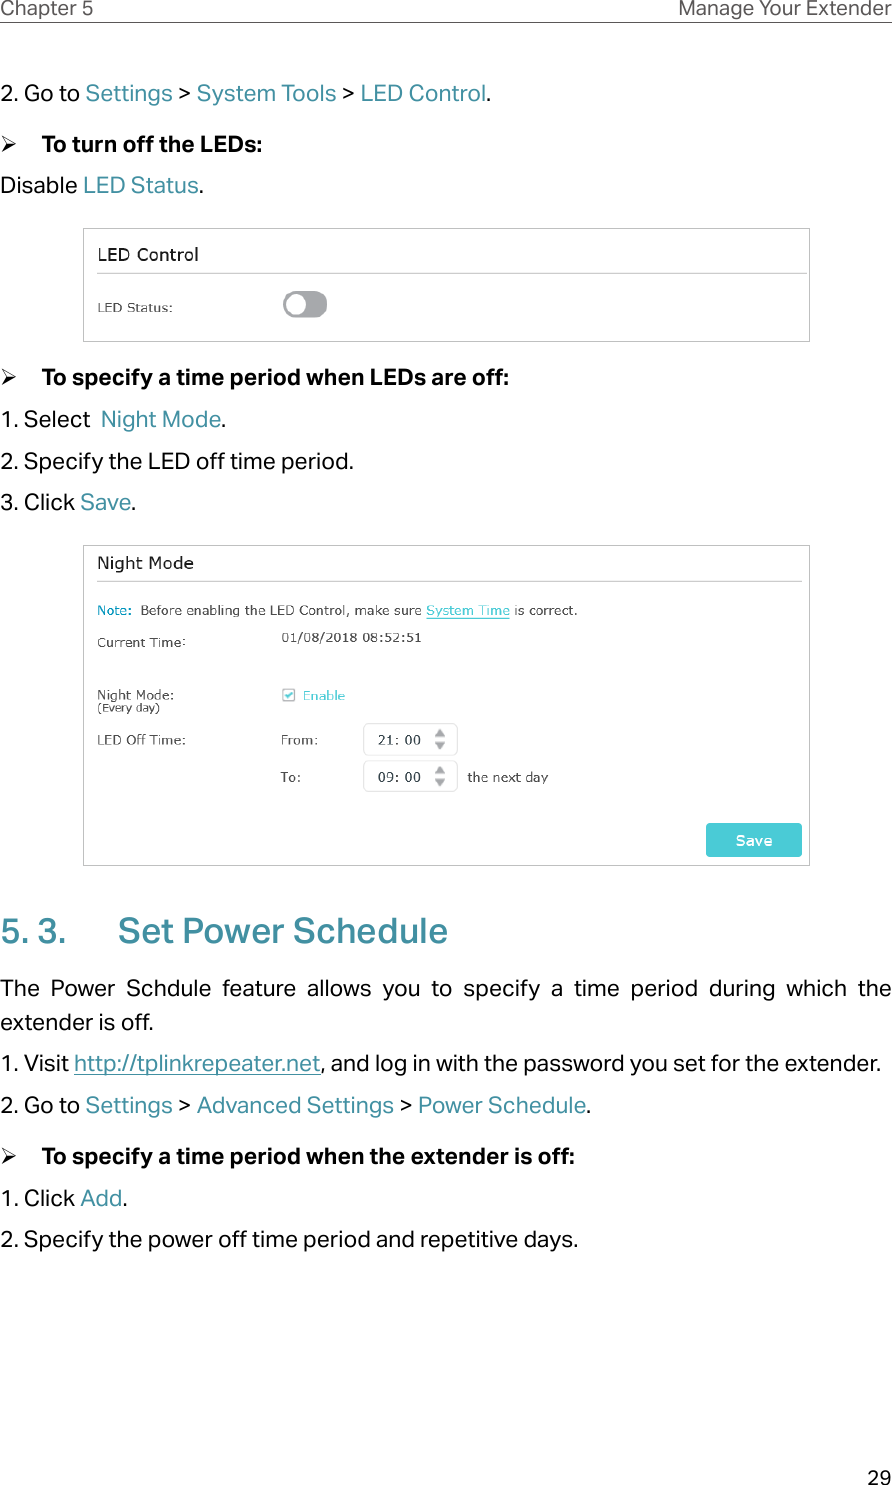 29Chapter 5 Manage Your Extender 2. Go to Settings &gt; System Tools &gt; LED Control.  ¾To turn off the LEDs:Disable LED Status. ¾To specify a time period when LEDs are off:1. Select  Night Mode.2. Specify the LED off time period.3. Click Save. 5. 3.  Set Power ScheduleThe Power Schdule feature allows you to specify a time period during which the extender is off.1. Visit http://tplinkrepeater.net, and log in with the password you set for the extender. 2. Go to Settings &gt; Advanced Settings &gt; Power Schedule.  ¾To specify a time period when the extender is off:1. Click Add.2. Specify the power off time period and repetitive days.